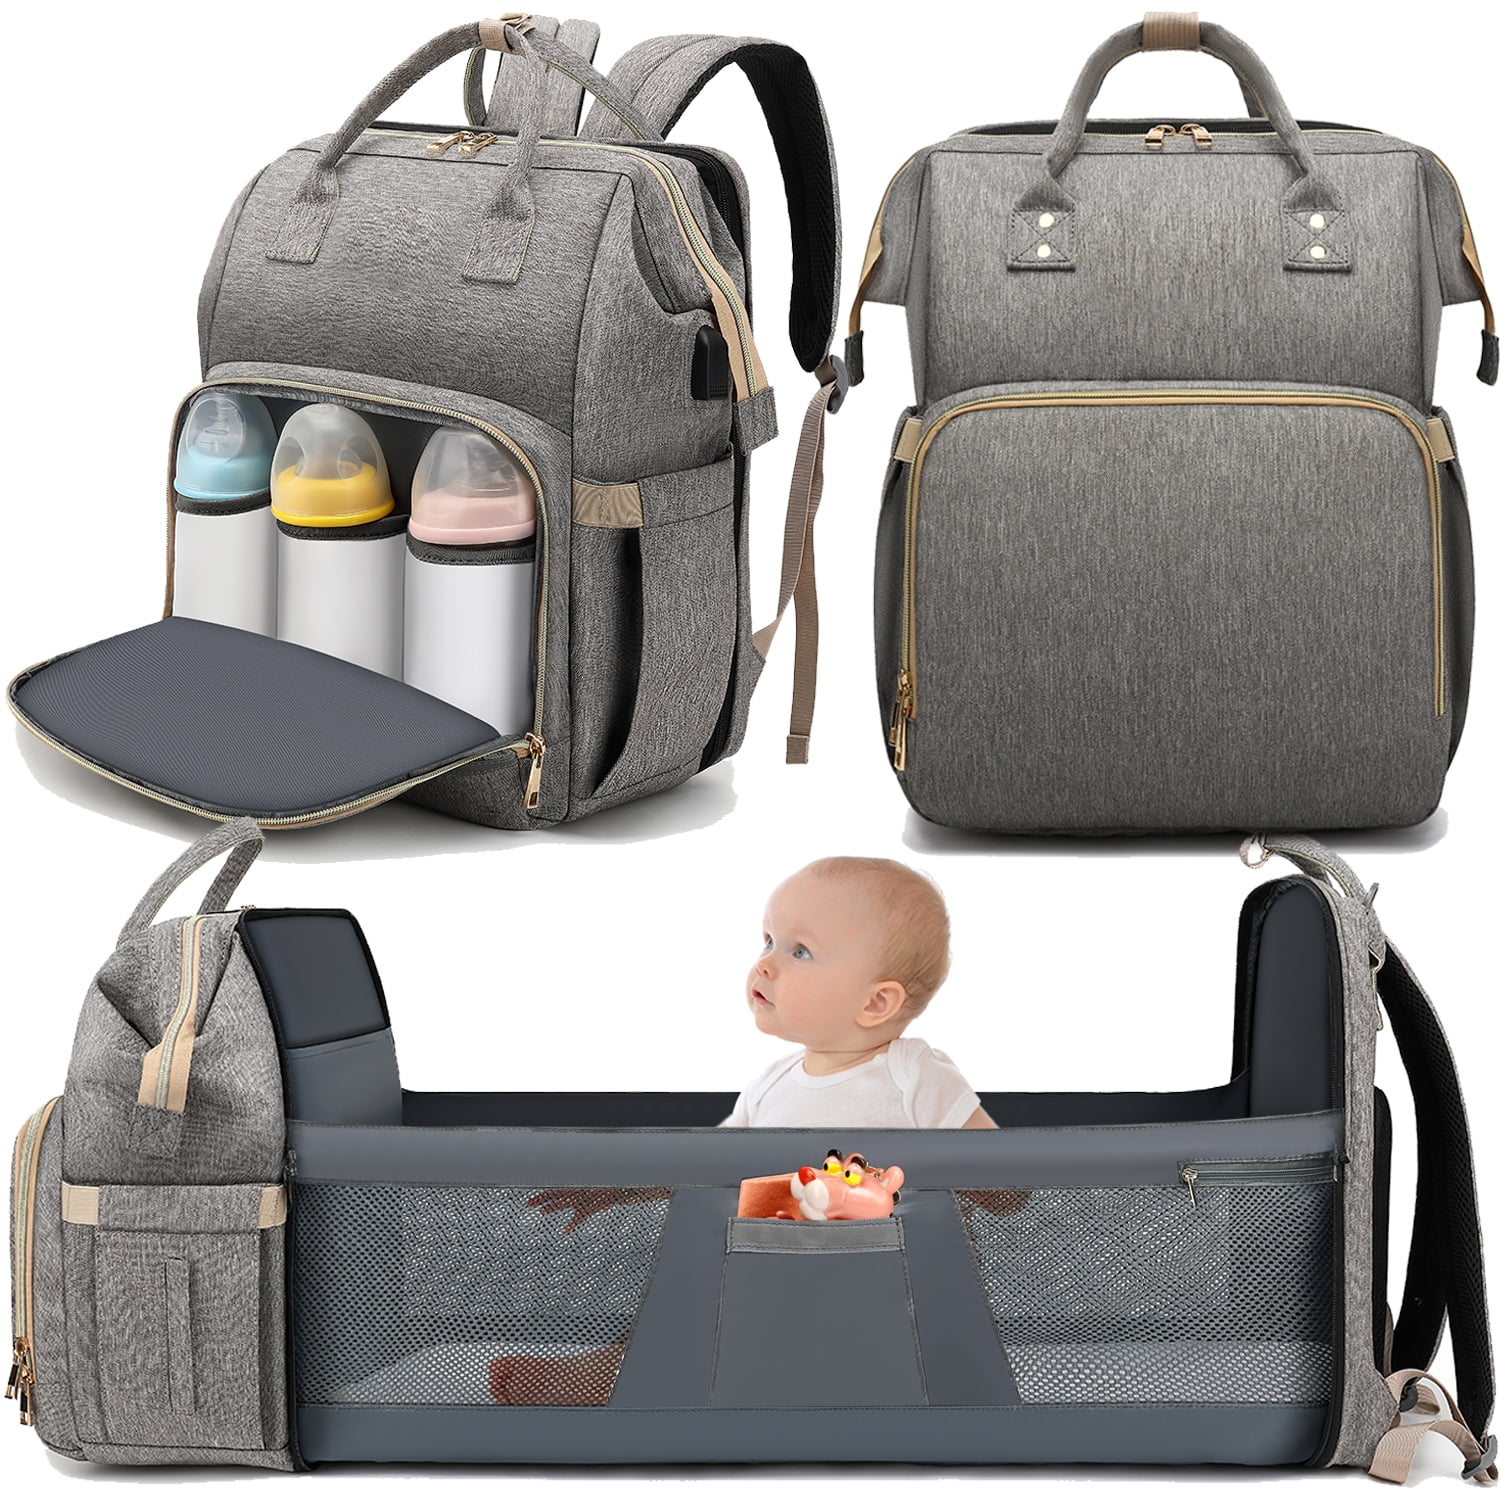 DEBUG Baby Diaper Bag with Changing Station, Baby Shower Gifts - 30L ...